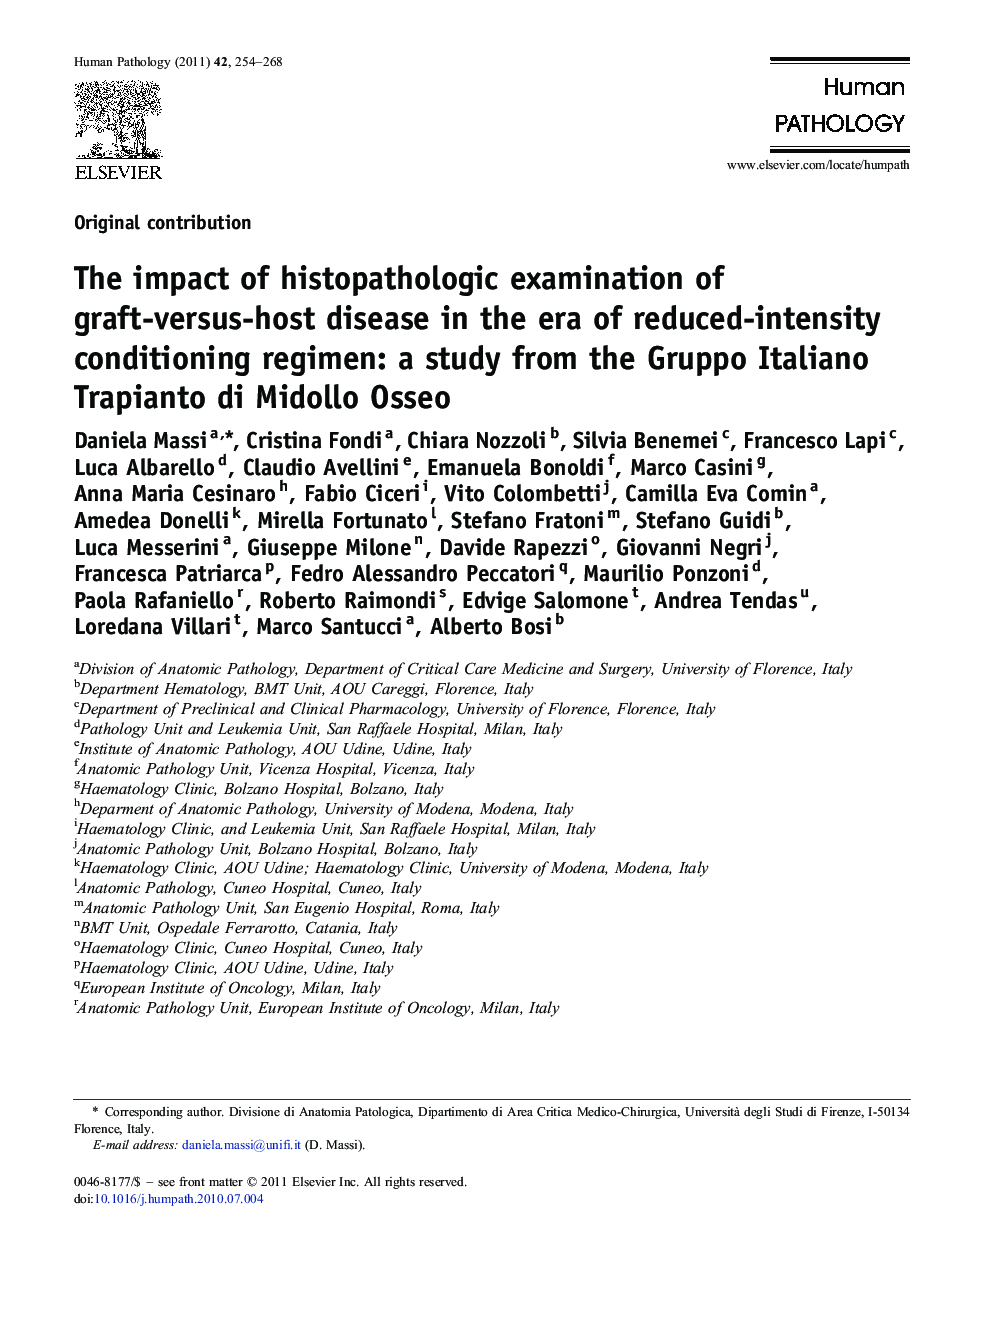 The impact of histopathologic examination of graft-versus-host disease in the era of reduced-intensity conditioning regimen: a study from the Gruppo Italiano Trapianto di Midollo Osseo